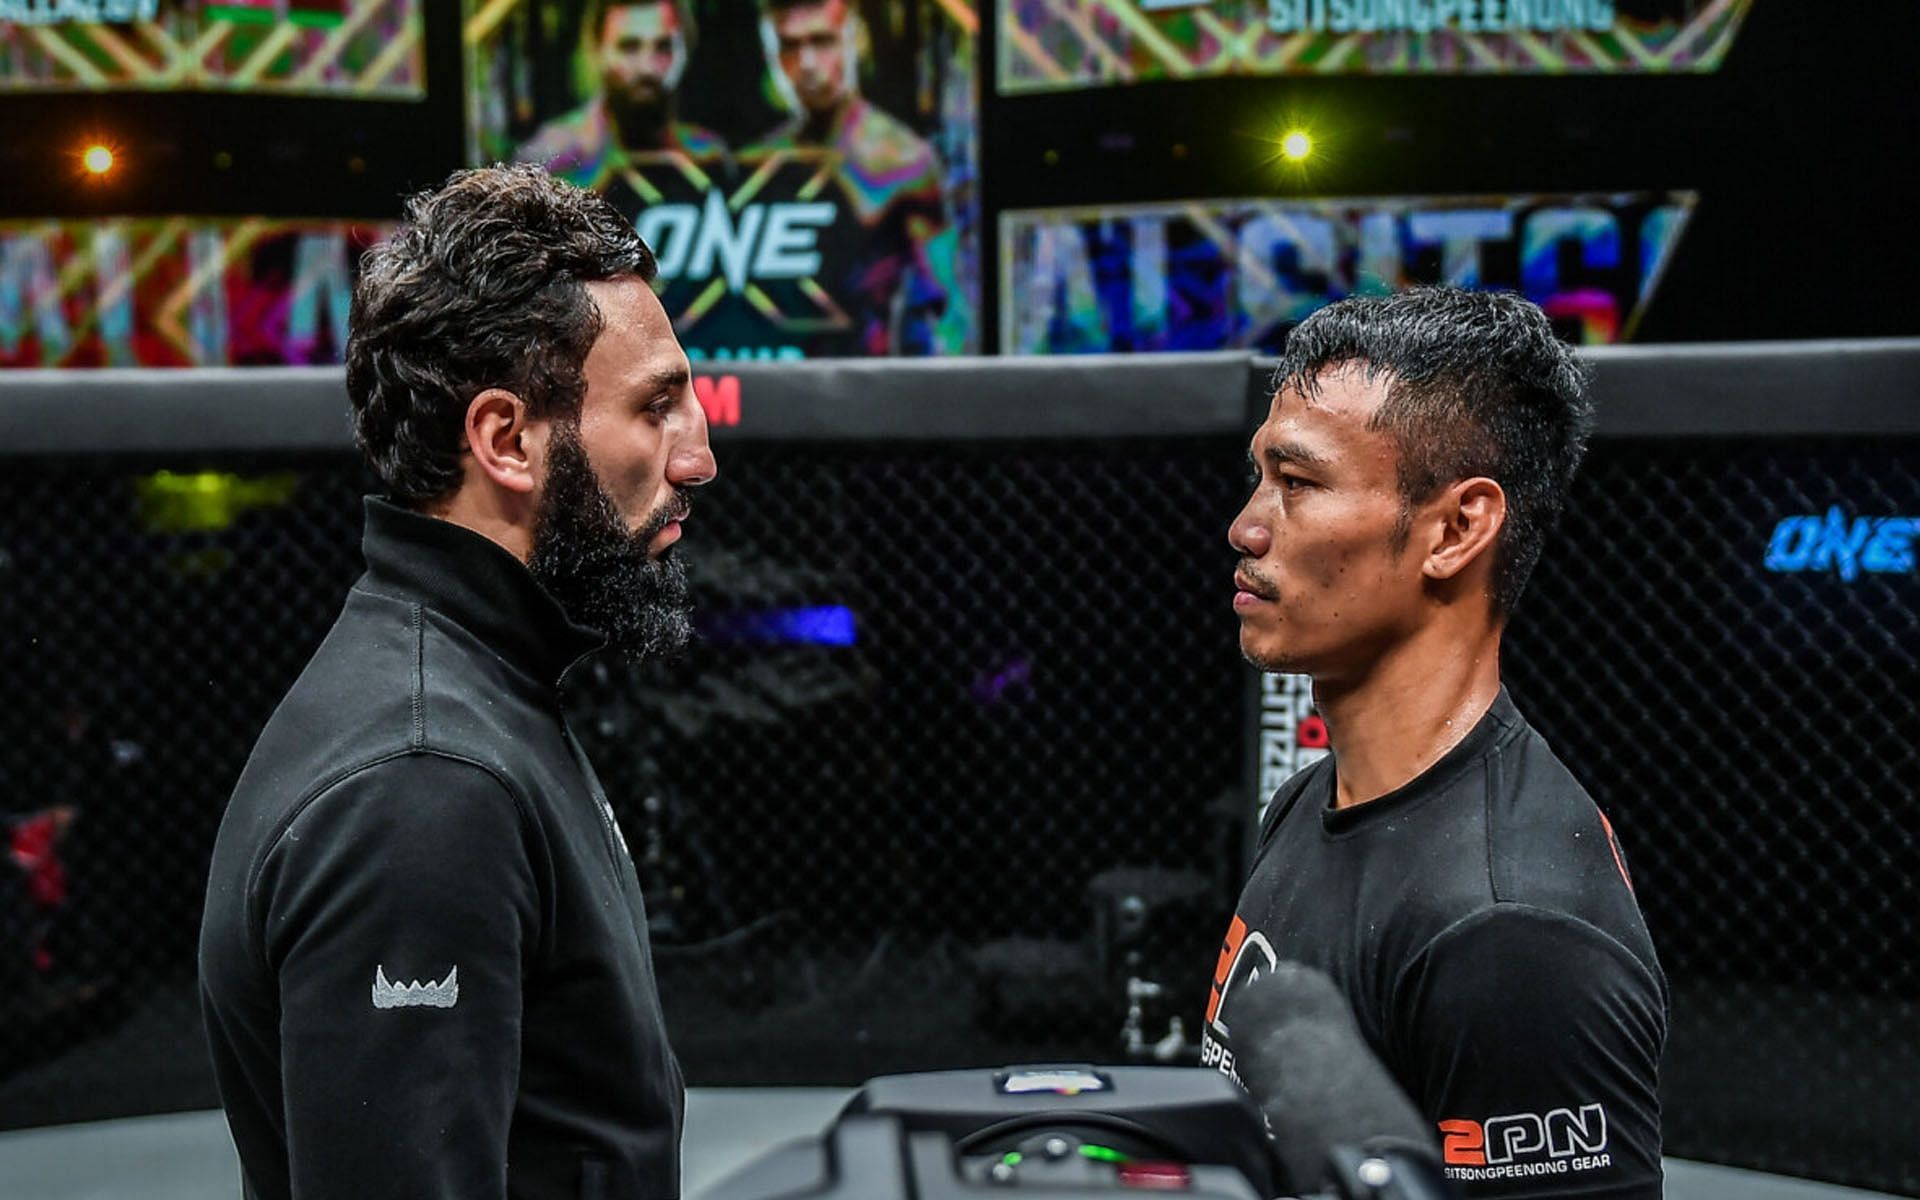 Chingiz Allazov (Left) and Sithichai (Right) booked their ticket to the finals of the ONE Featherweight Kickboxing World Grand Prix in the recently concluded ONE: Only the Brave. | [Photo: ONE Championship]